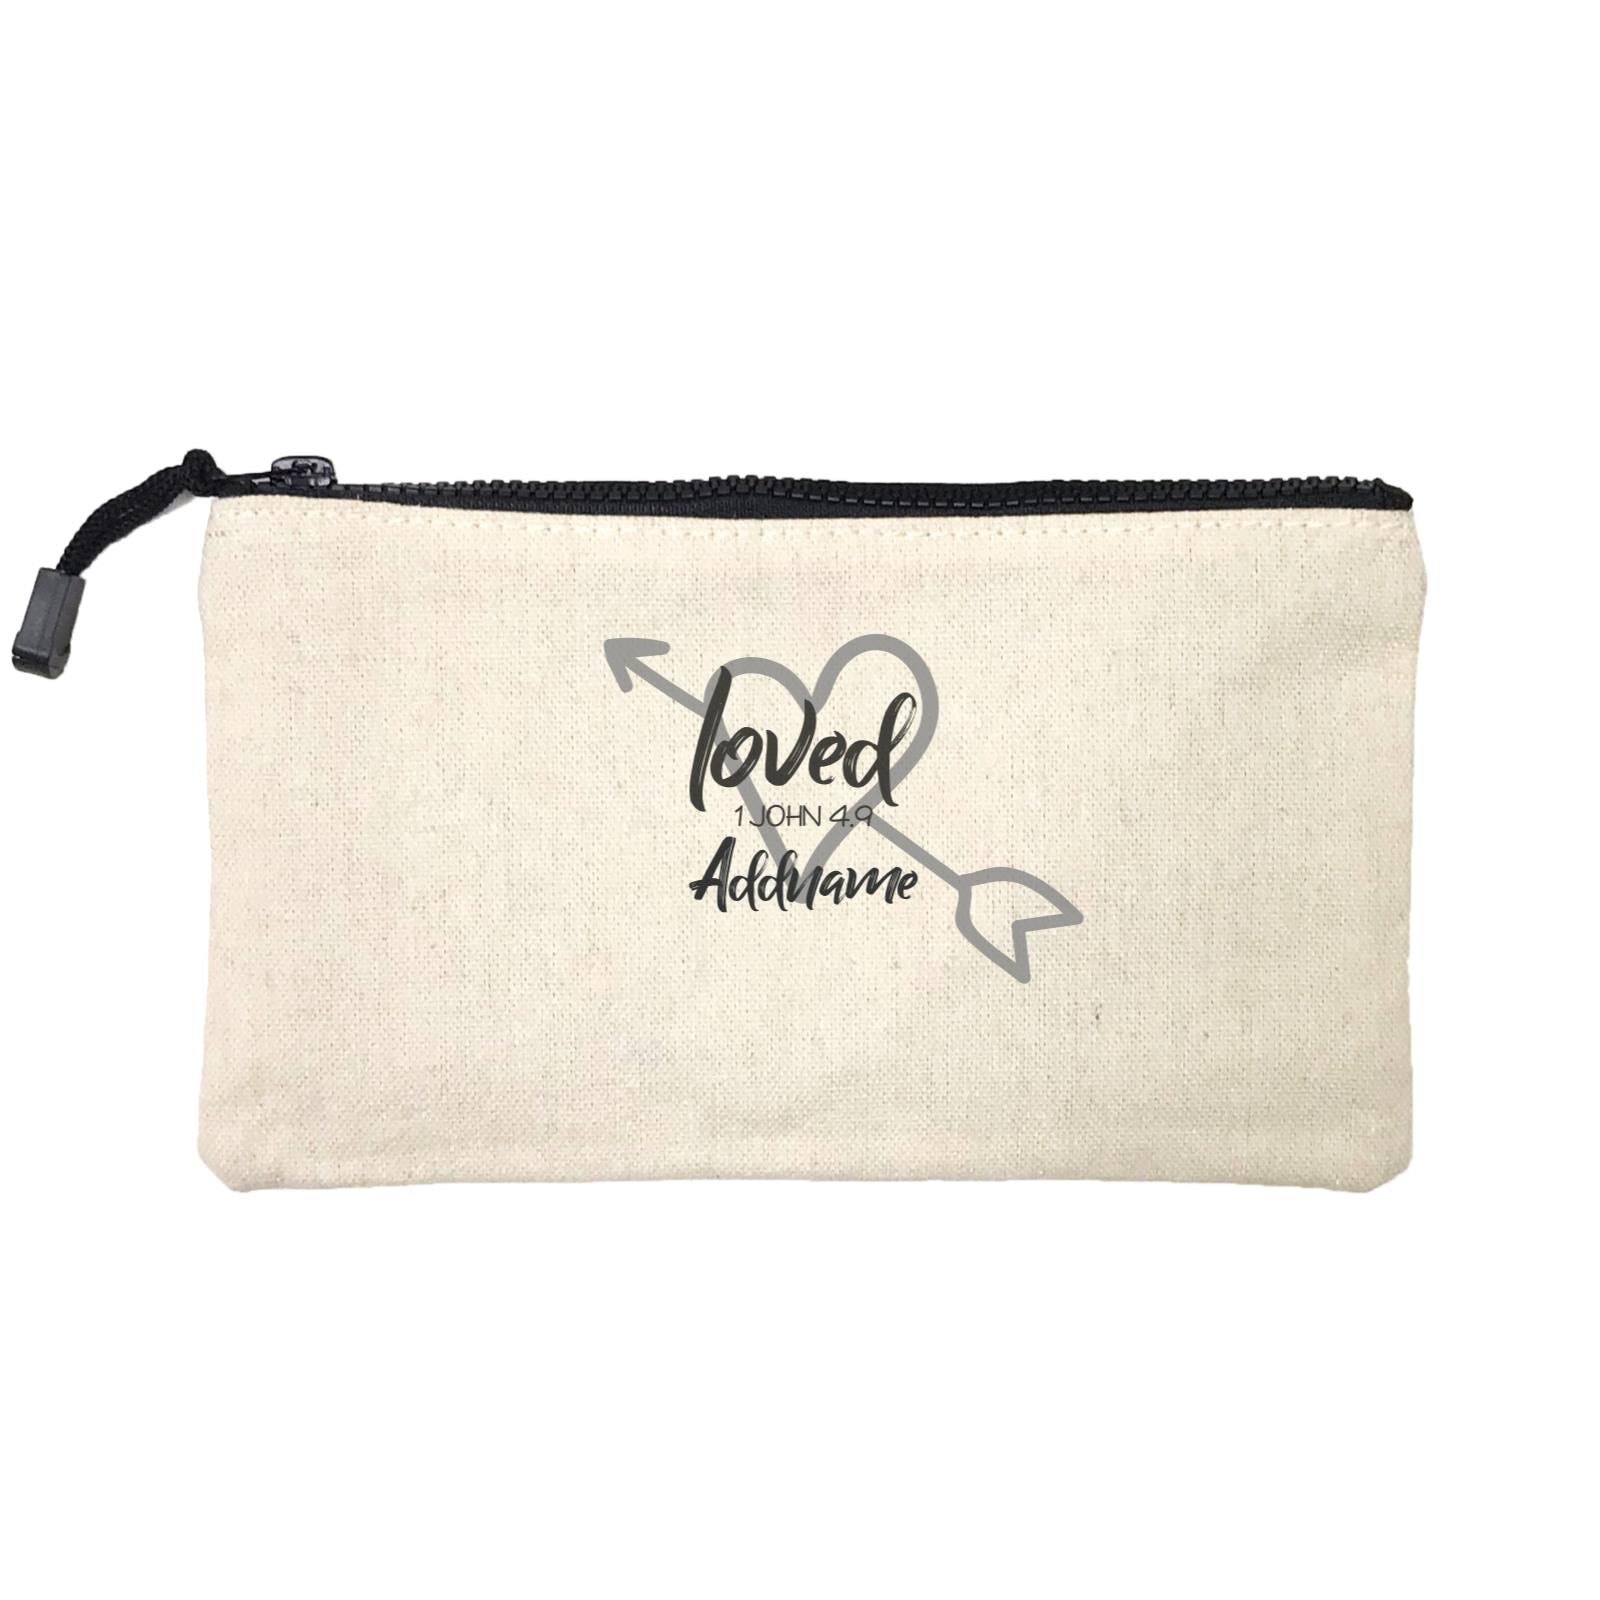 Loved Family Loved With Heart And Arrow 1 John 4.9 Addname Mini Accessories Stationery Pouch